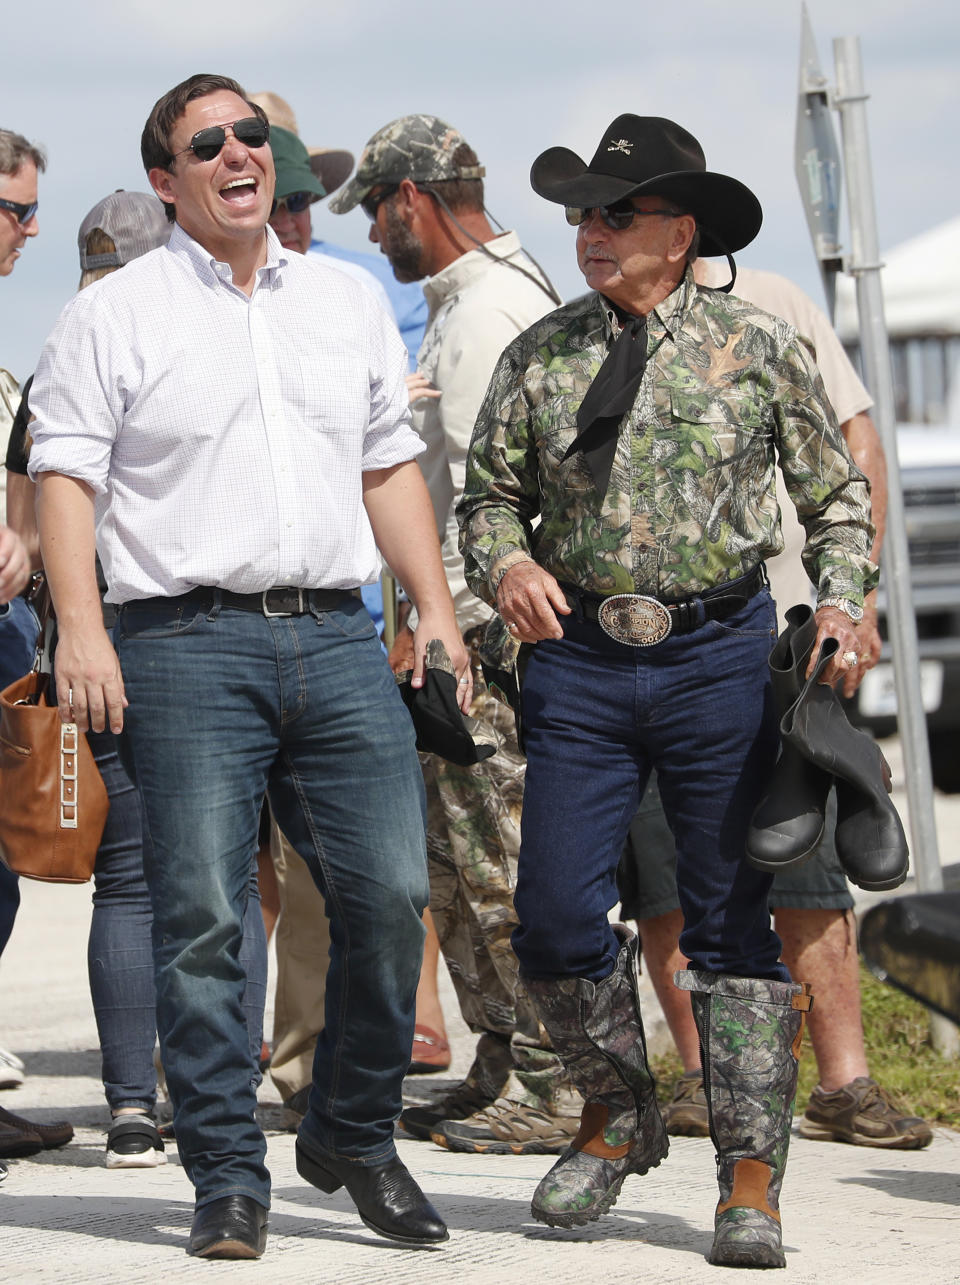 Republican candidate for Florida Governor Ron DeSantis, shares a laugh with Gladesman and former Florida Fish and Wildlife Conservation commissioner Ron Bergeron before an airboat tour of the Florida Everglades, Wednesday, Sept. 12, 2018, in Fort Lauderdale, Fla. (AP Photo/Wilfredo Lee)